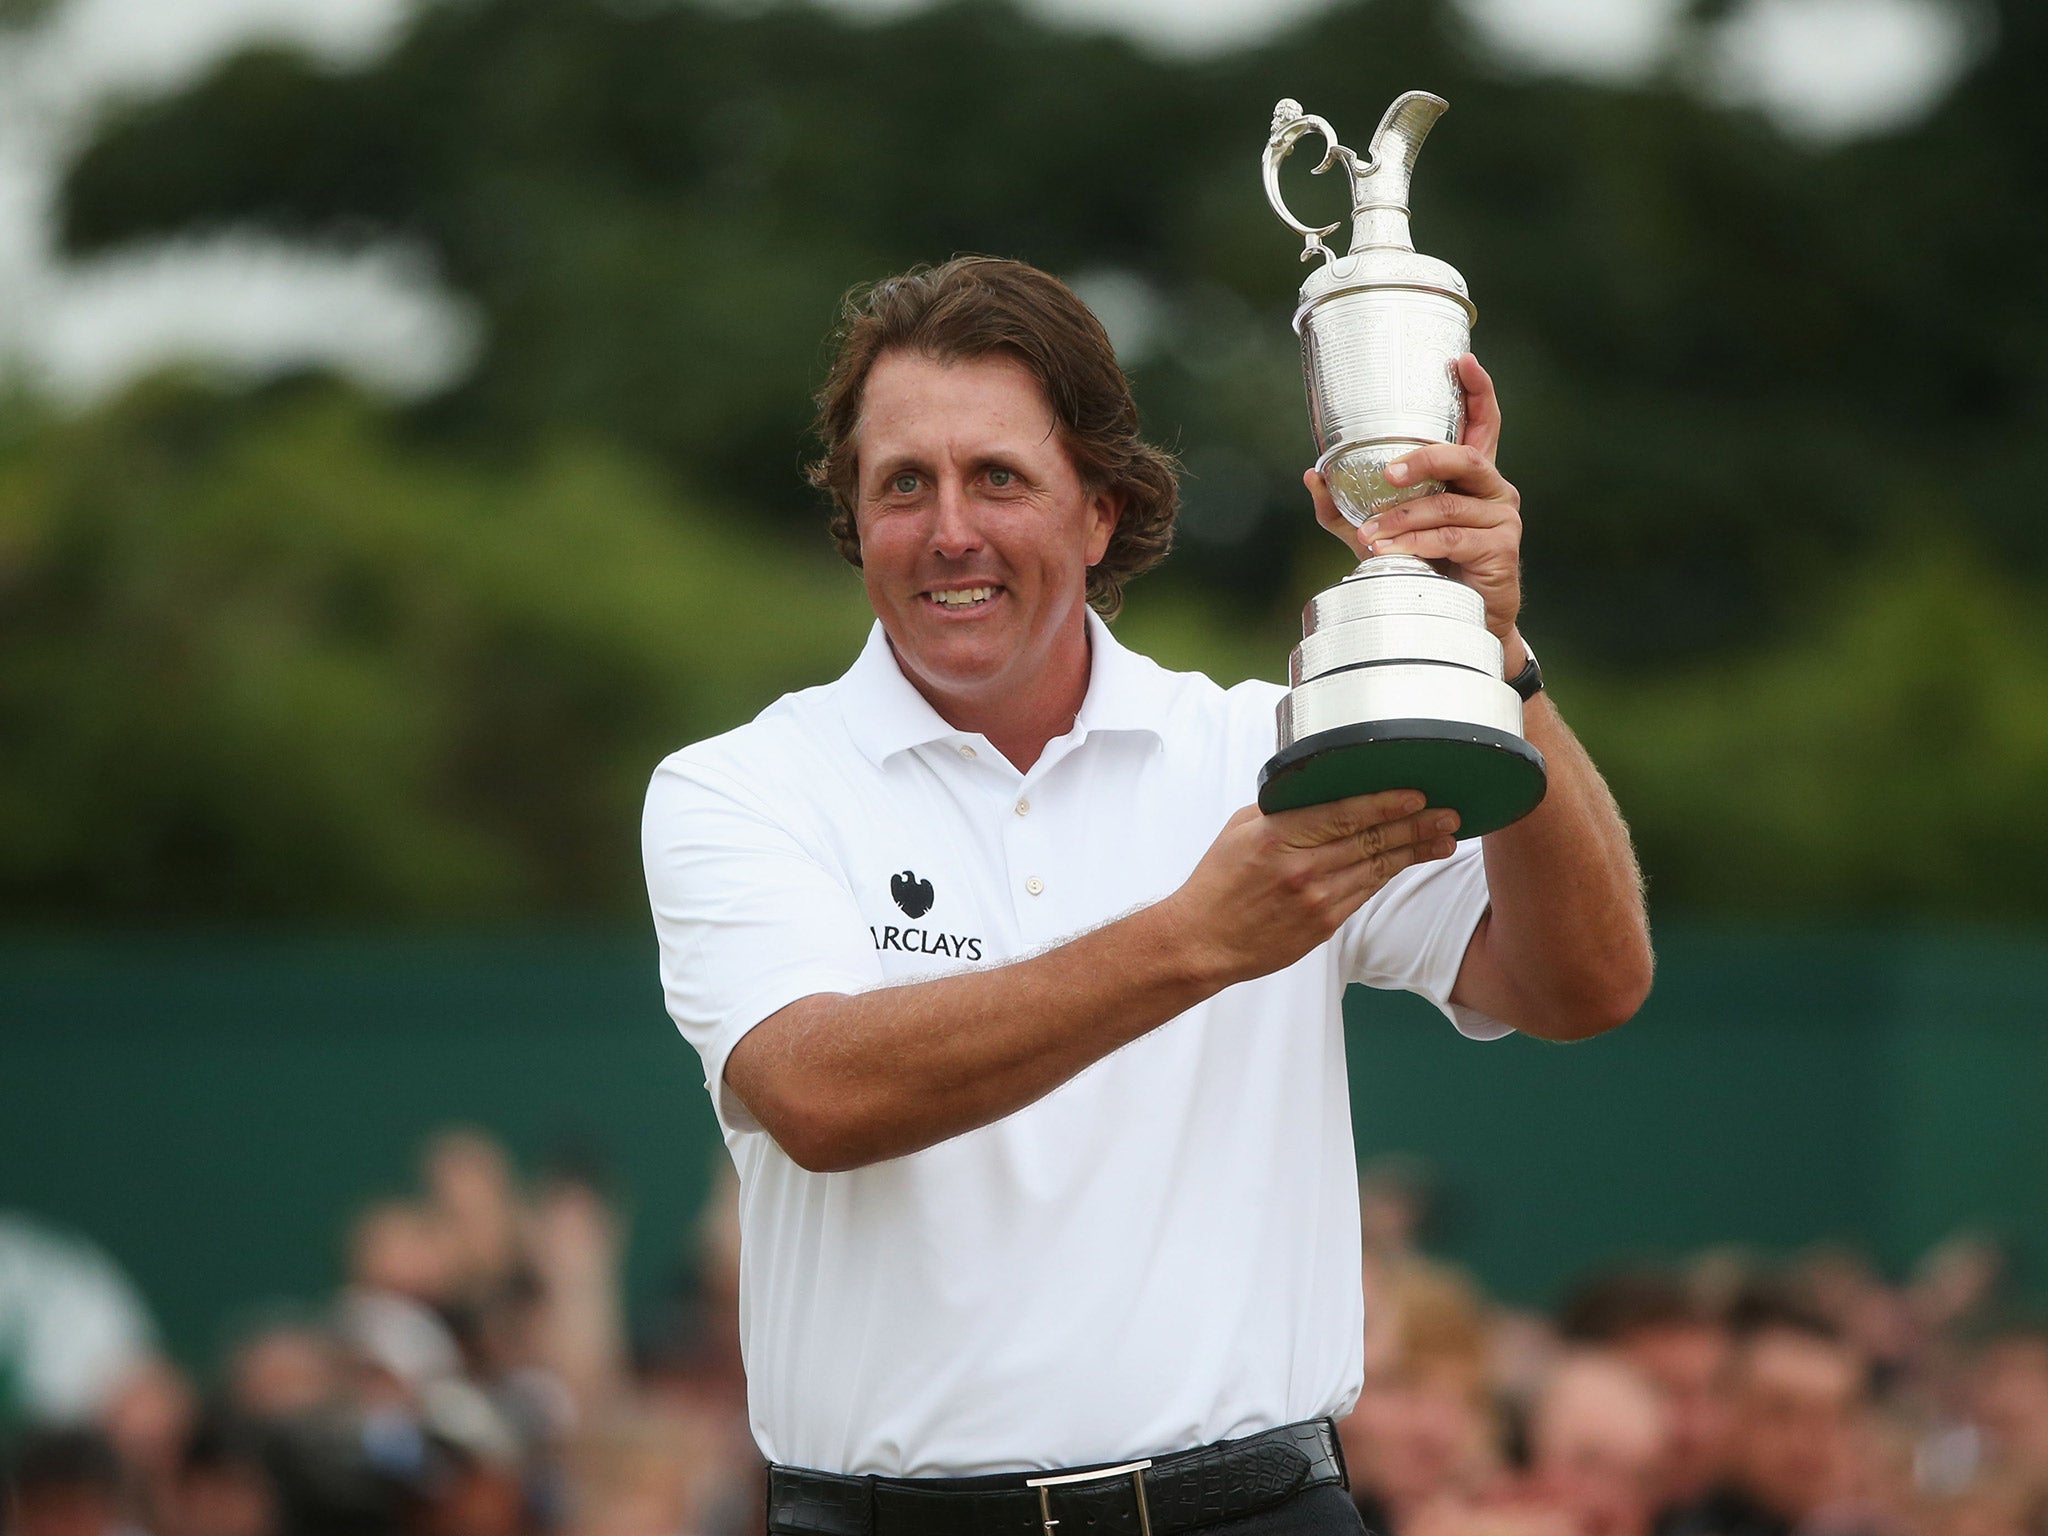 Phil Mickelson won the last Open Championship at Muirfield in 2013